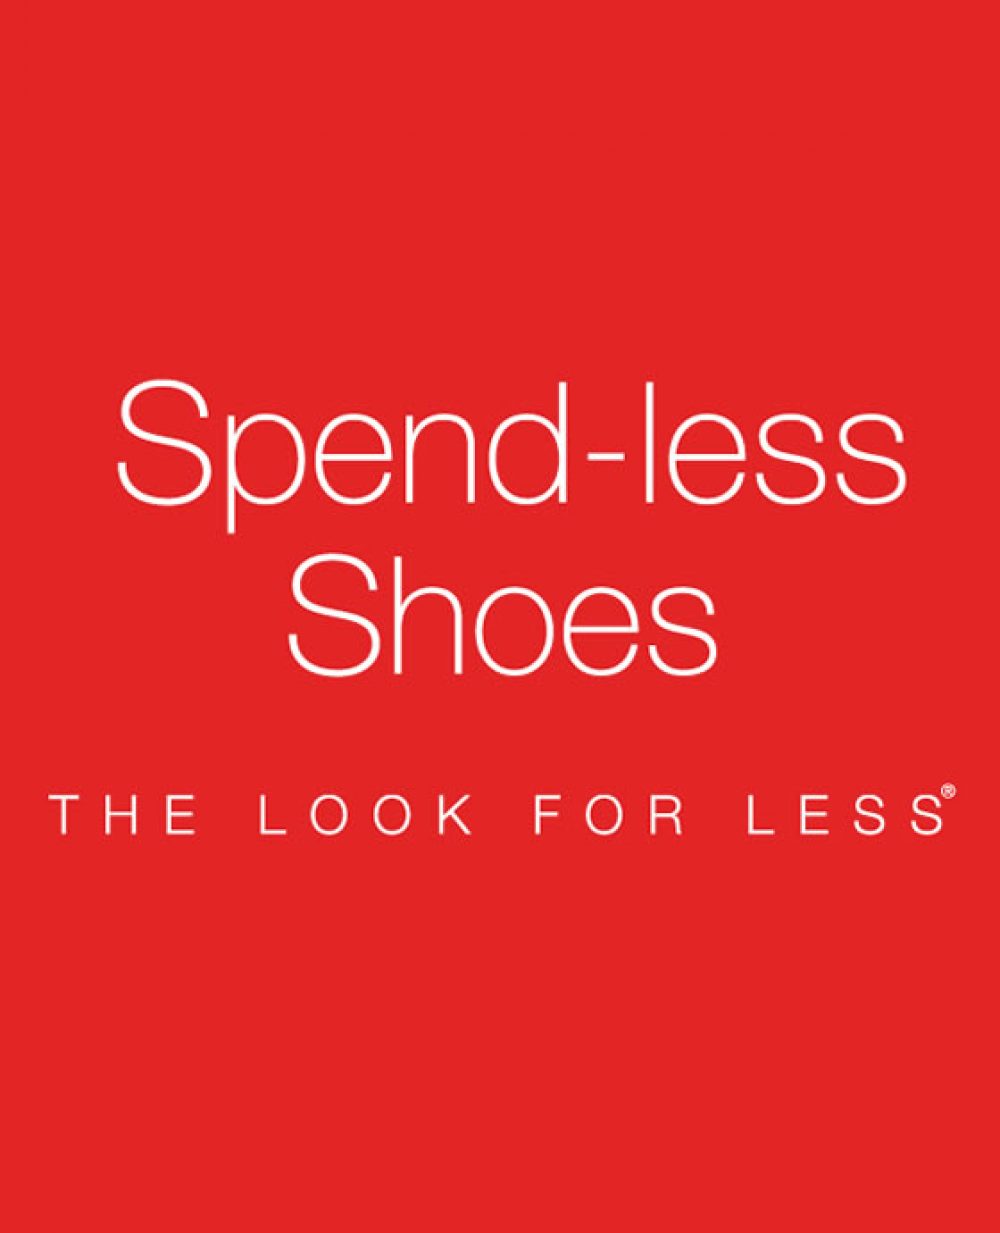 spendless shoes values